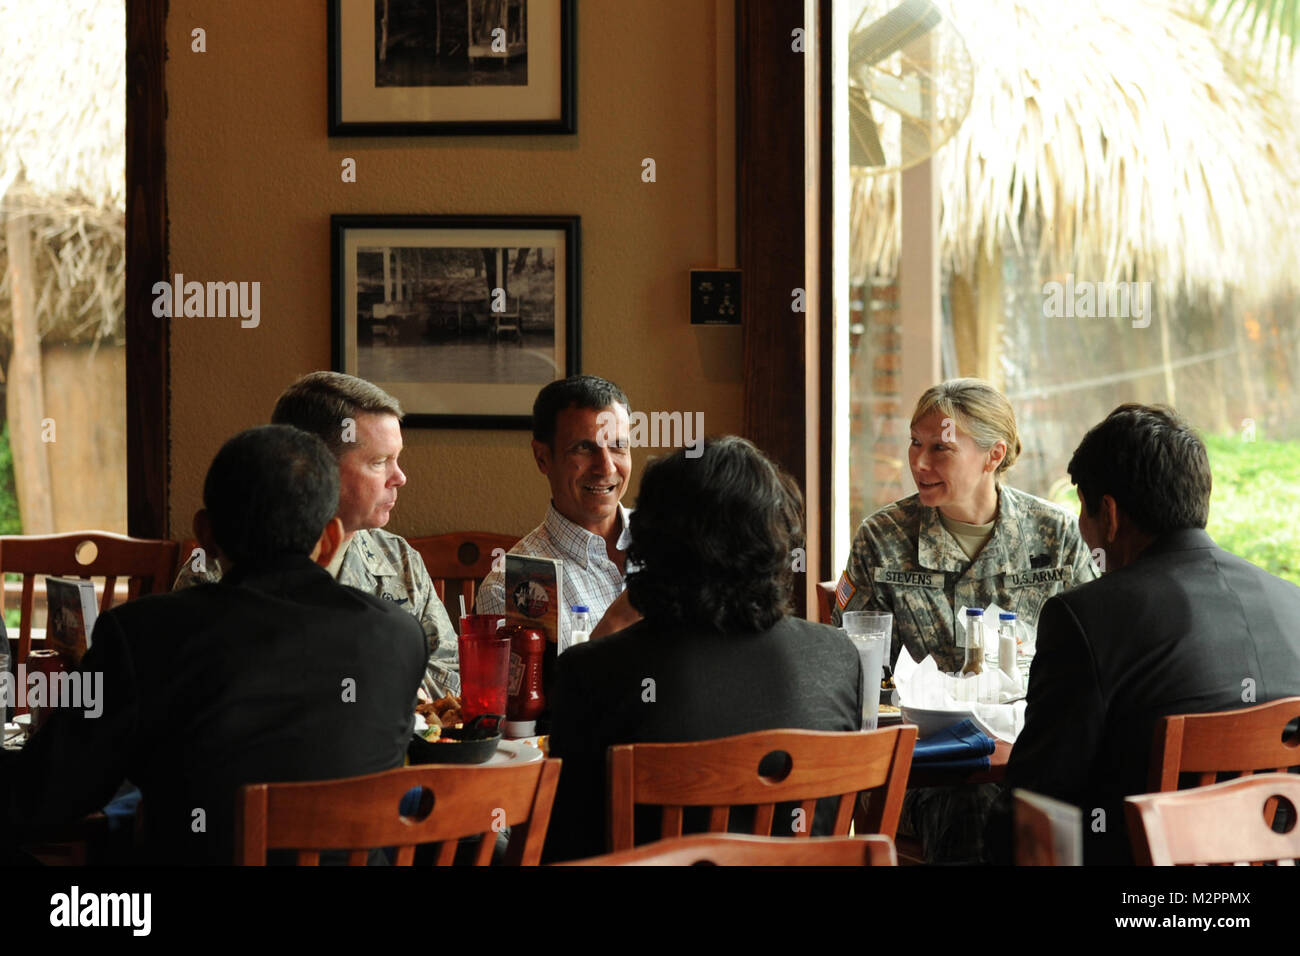 On May 2nd 2011, in Austin, Texas, Major General John F. Nichols, the Adjutant General of the Texas Military Forces and Brigadier General Joyce L. Stevens the Assistant Adjutant General of the Texas Military Forces, has lunch with the Afghanistan delegation to Texas.  The Afghanistan delegation is here to discuss continued partnership opportunities with their country. The delegation consists of Afghan representatives from provincial and district levels of government, the University of Ghazni, and a representative from Afghan media, Tolo TV.(U.S. Air Force photo by Staff Sgt. Eric Wilson) 11050 Stock Photo